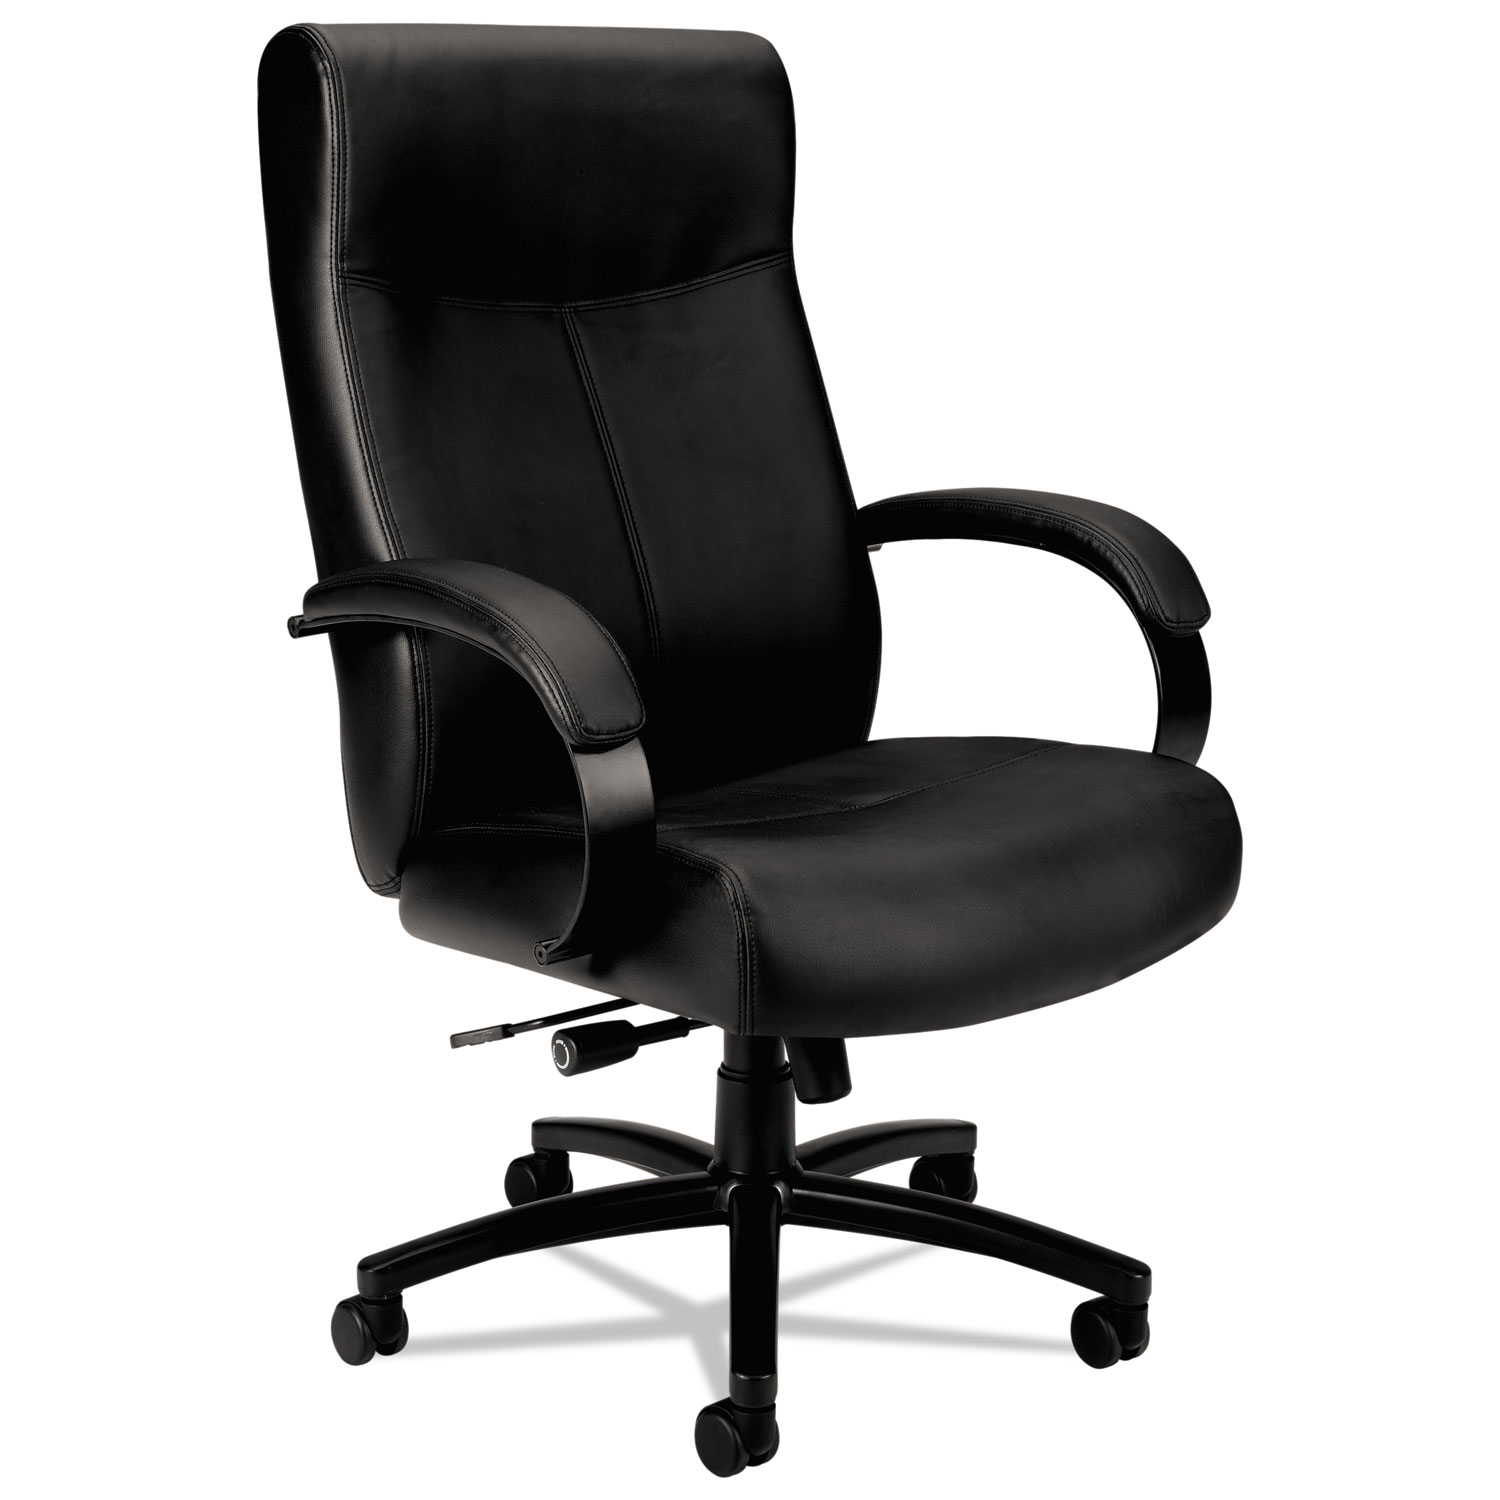  HON HVL685.SB11 Validate Big and Tall Leather Chair, Supports up to 450 lbs., Black Seat/Black Back, Black Base (BSXVL685SB11) 